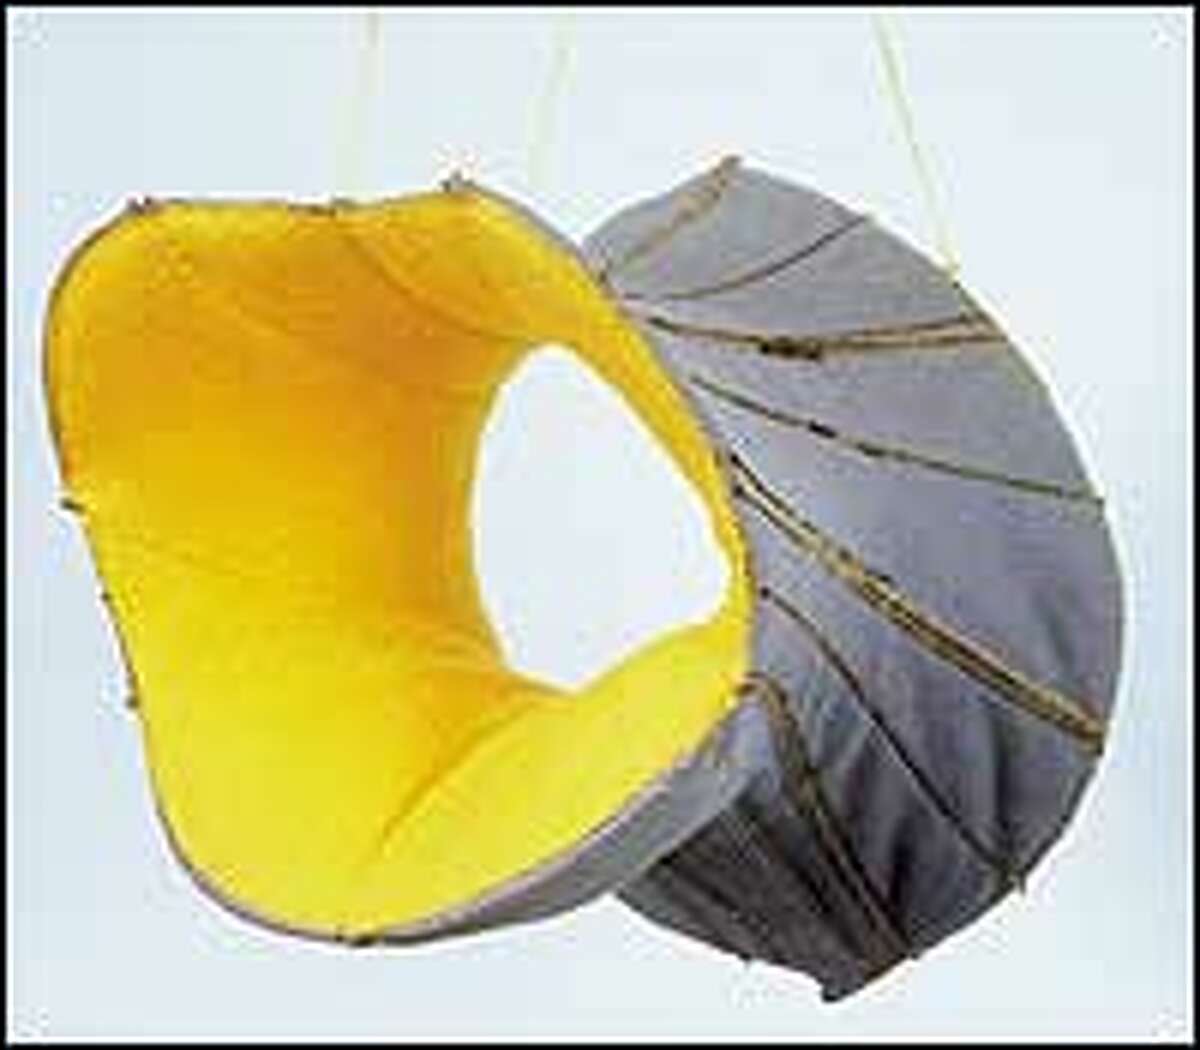 Leslie Claque's "Safety Vest for Airplane Travel."